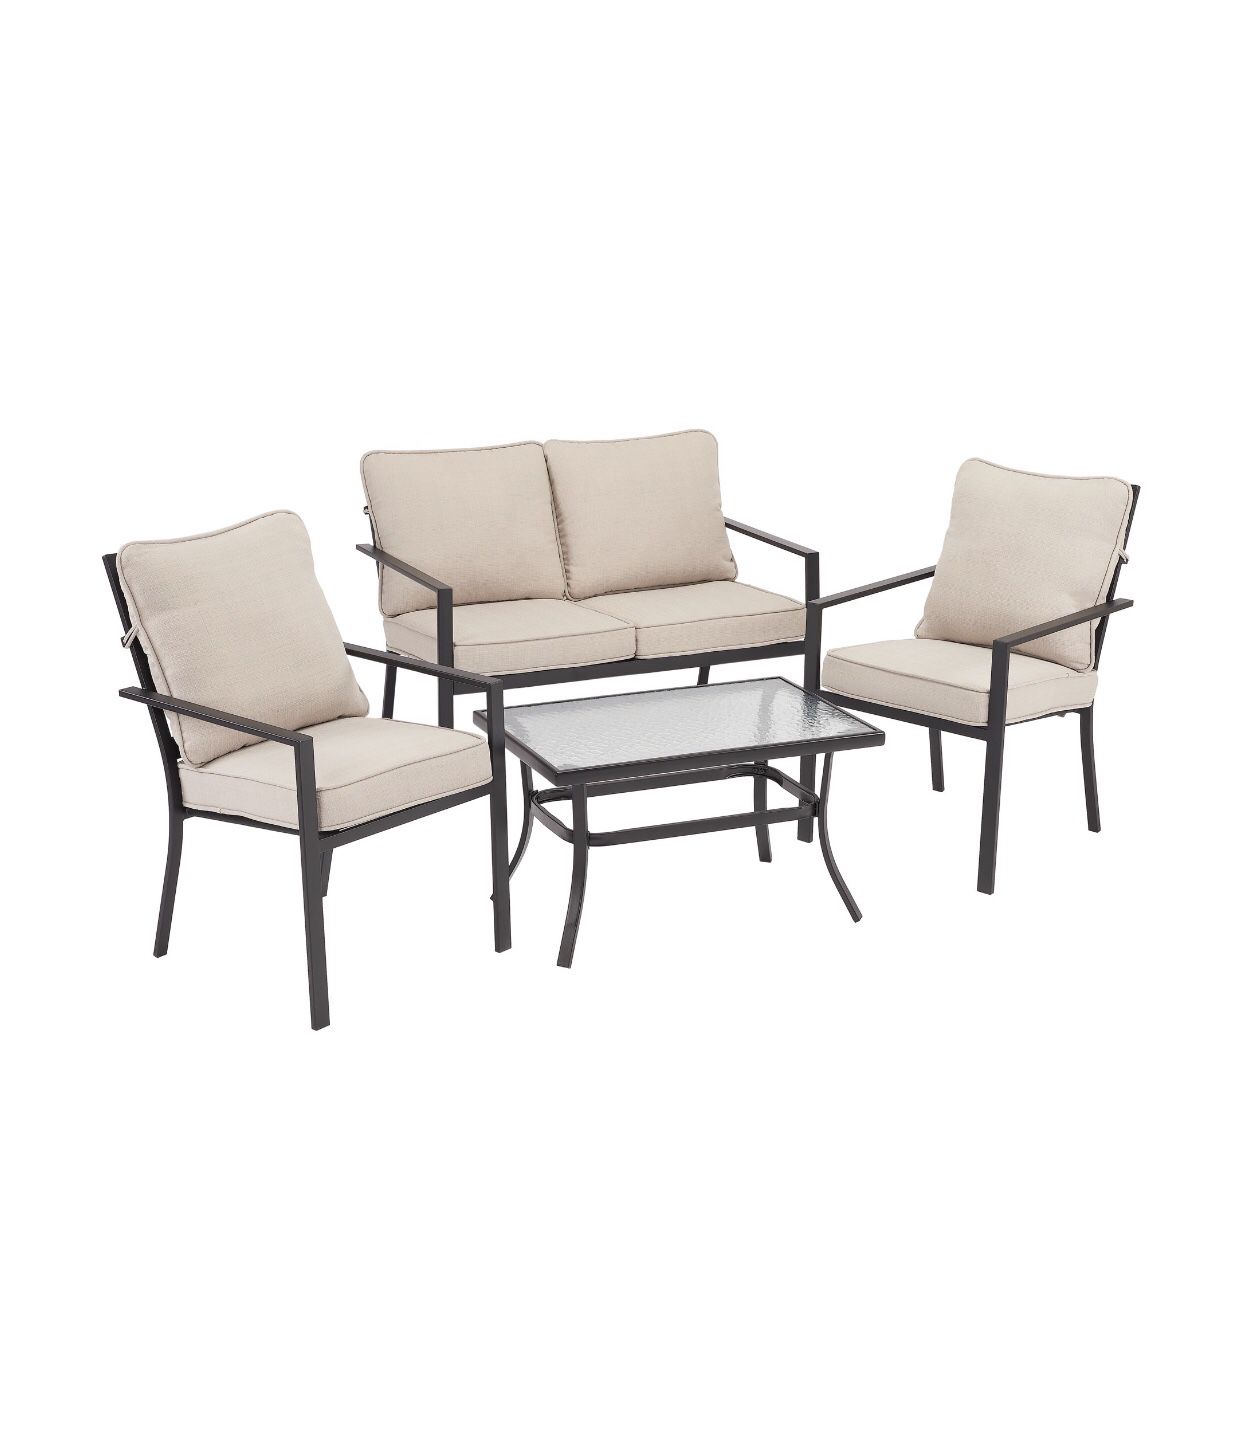 Brand new mainstay patio furniture set